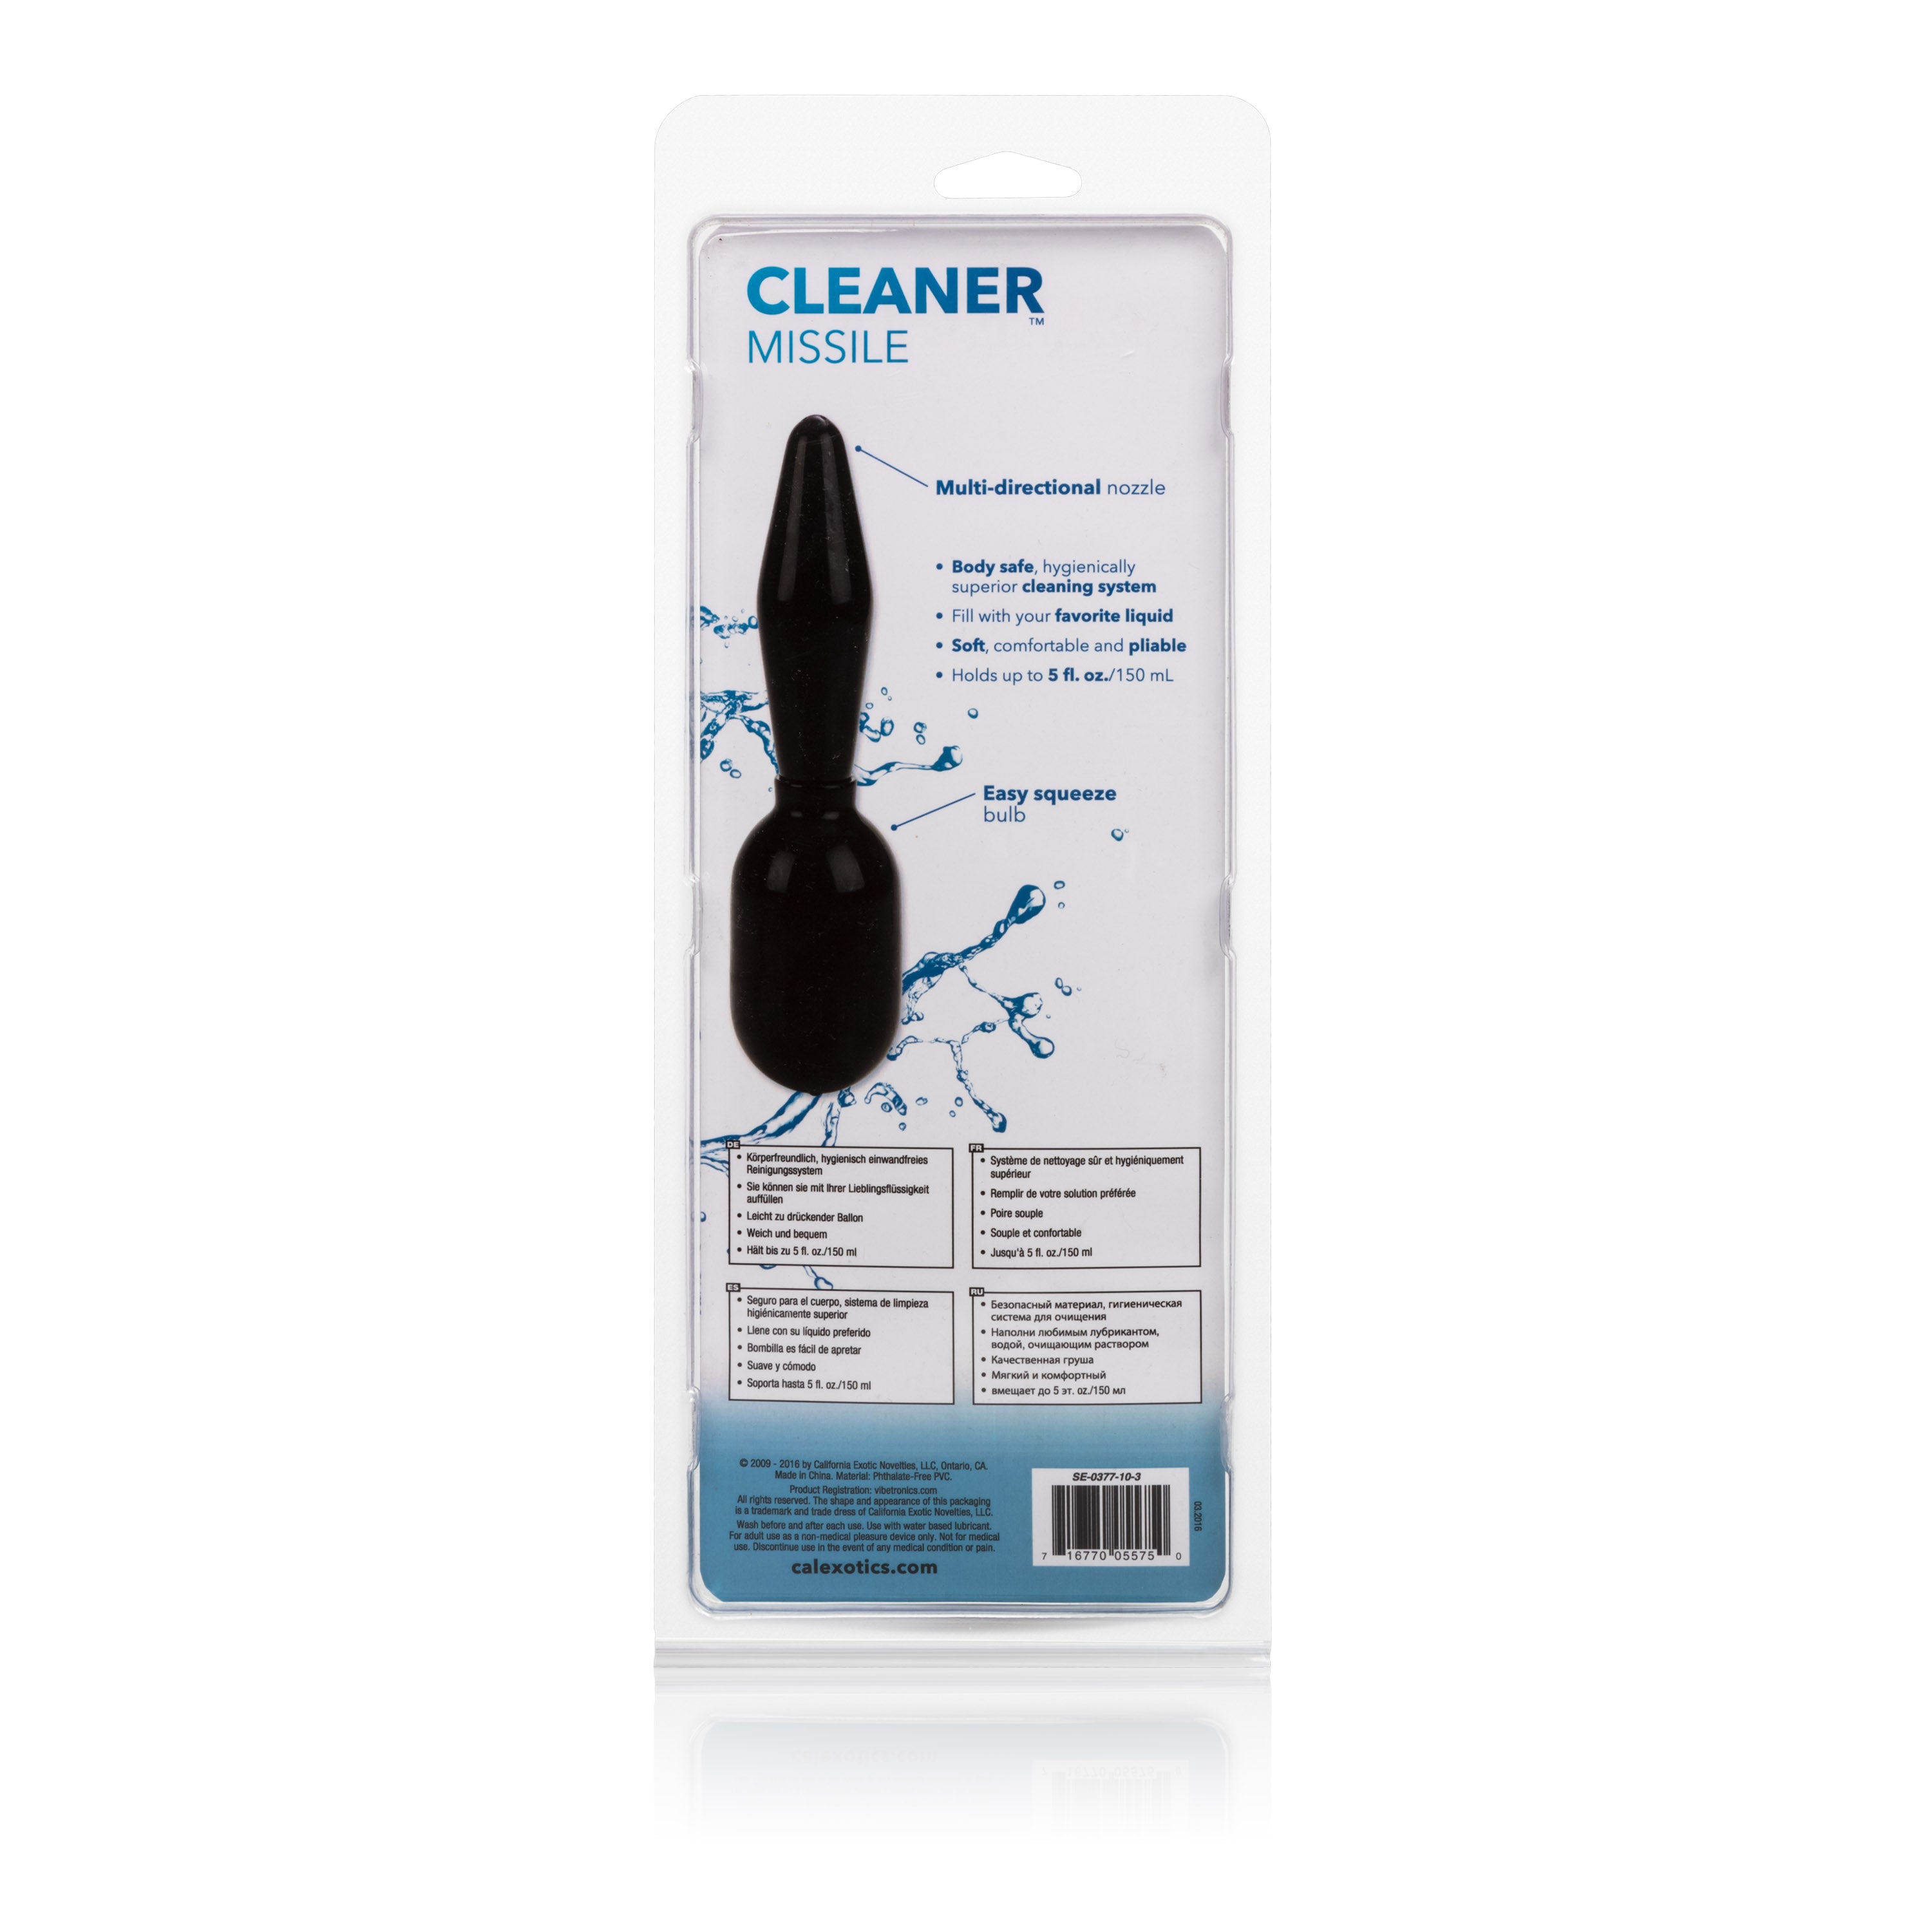 Cleaner Missile Douche: Sleek and Seamless Anal Hygiene System